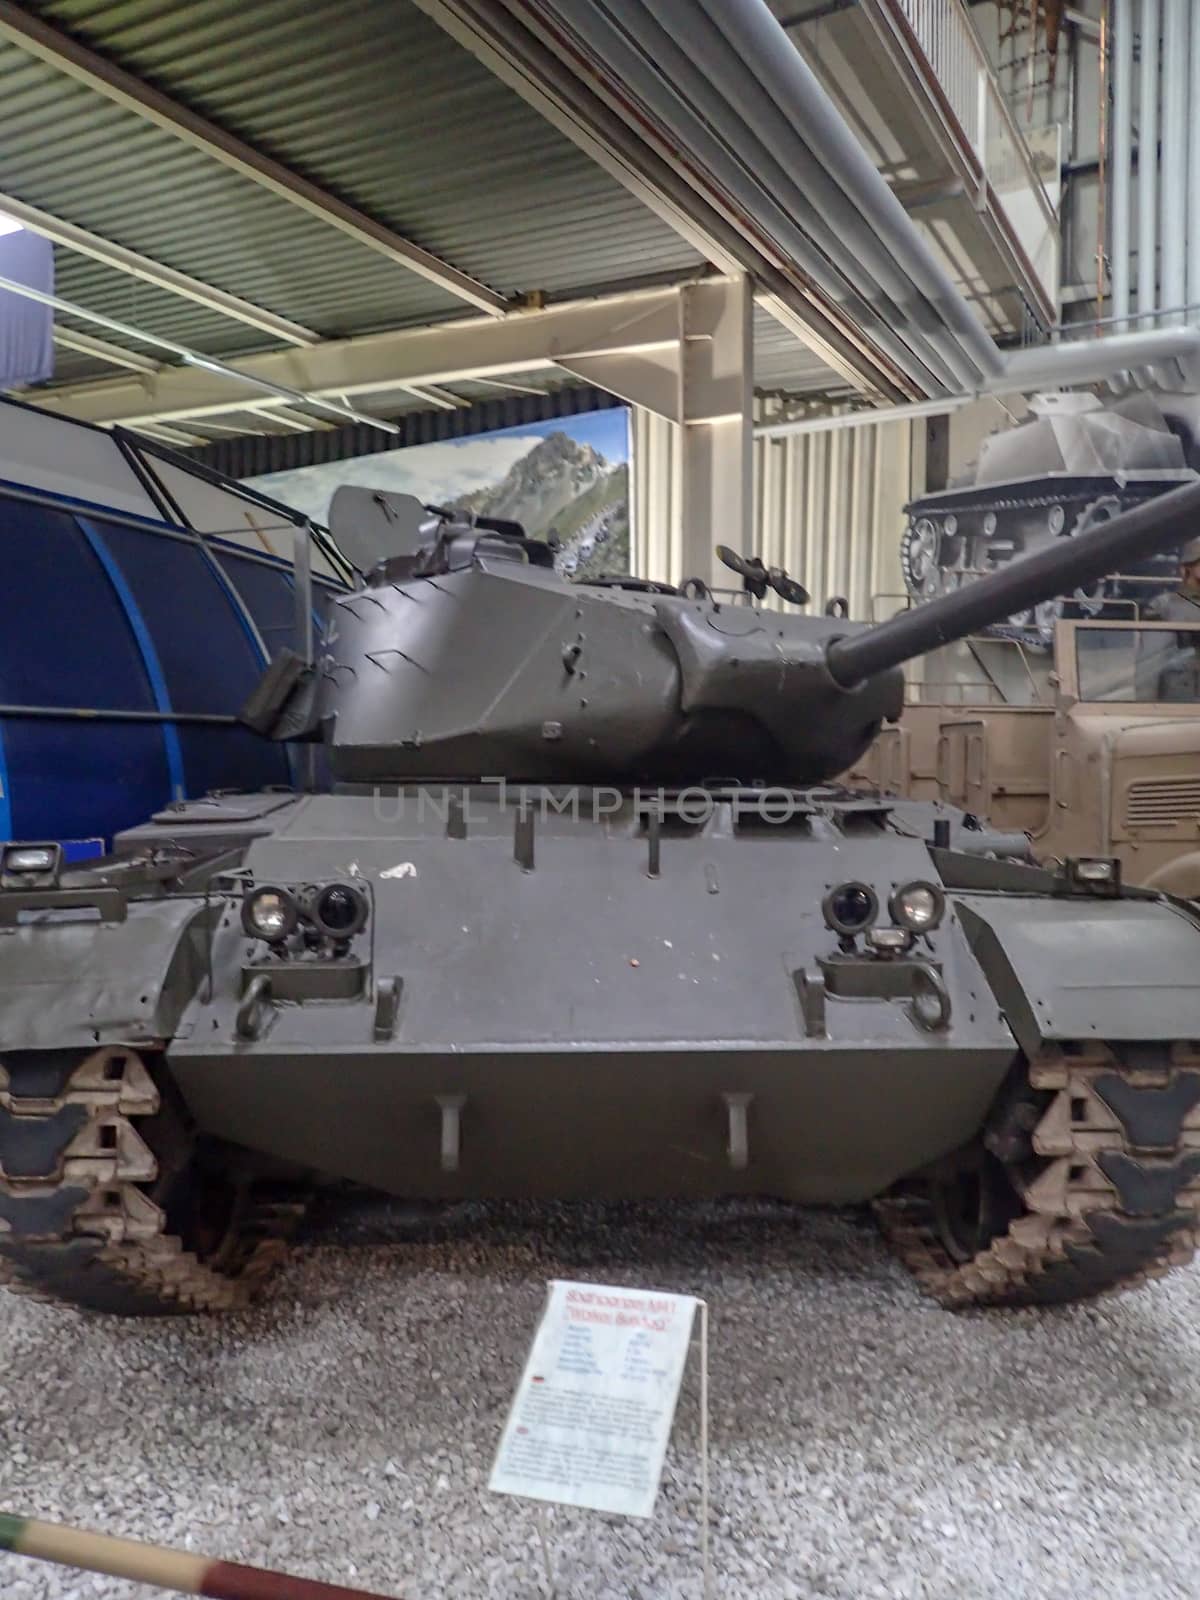 an old tank from the world war in a museum by Tevion25